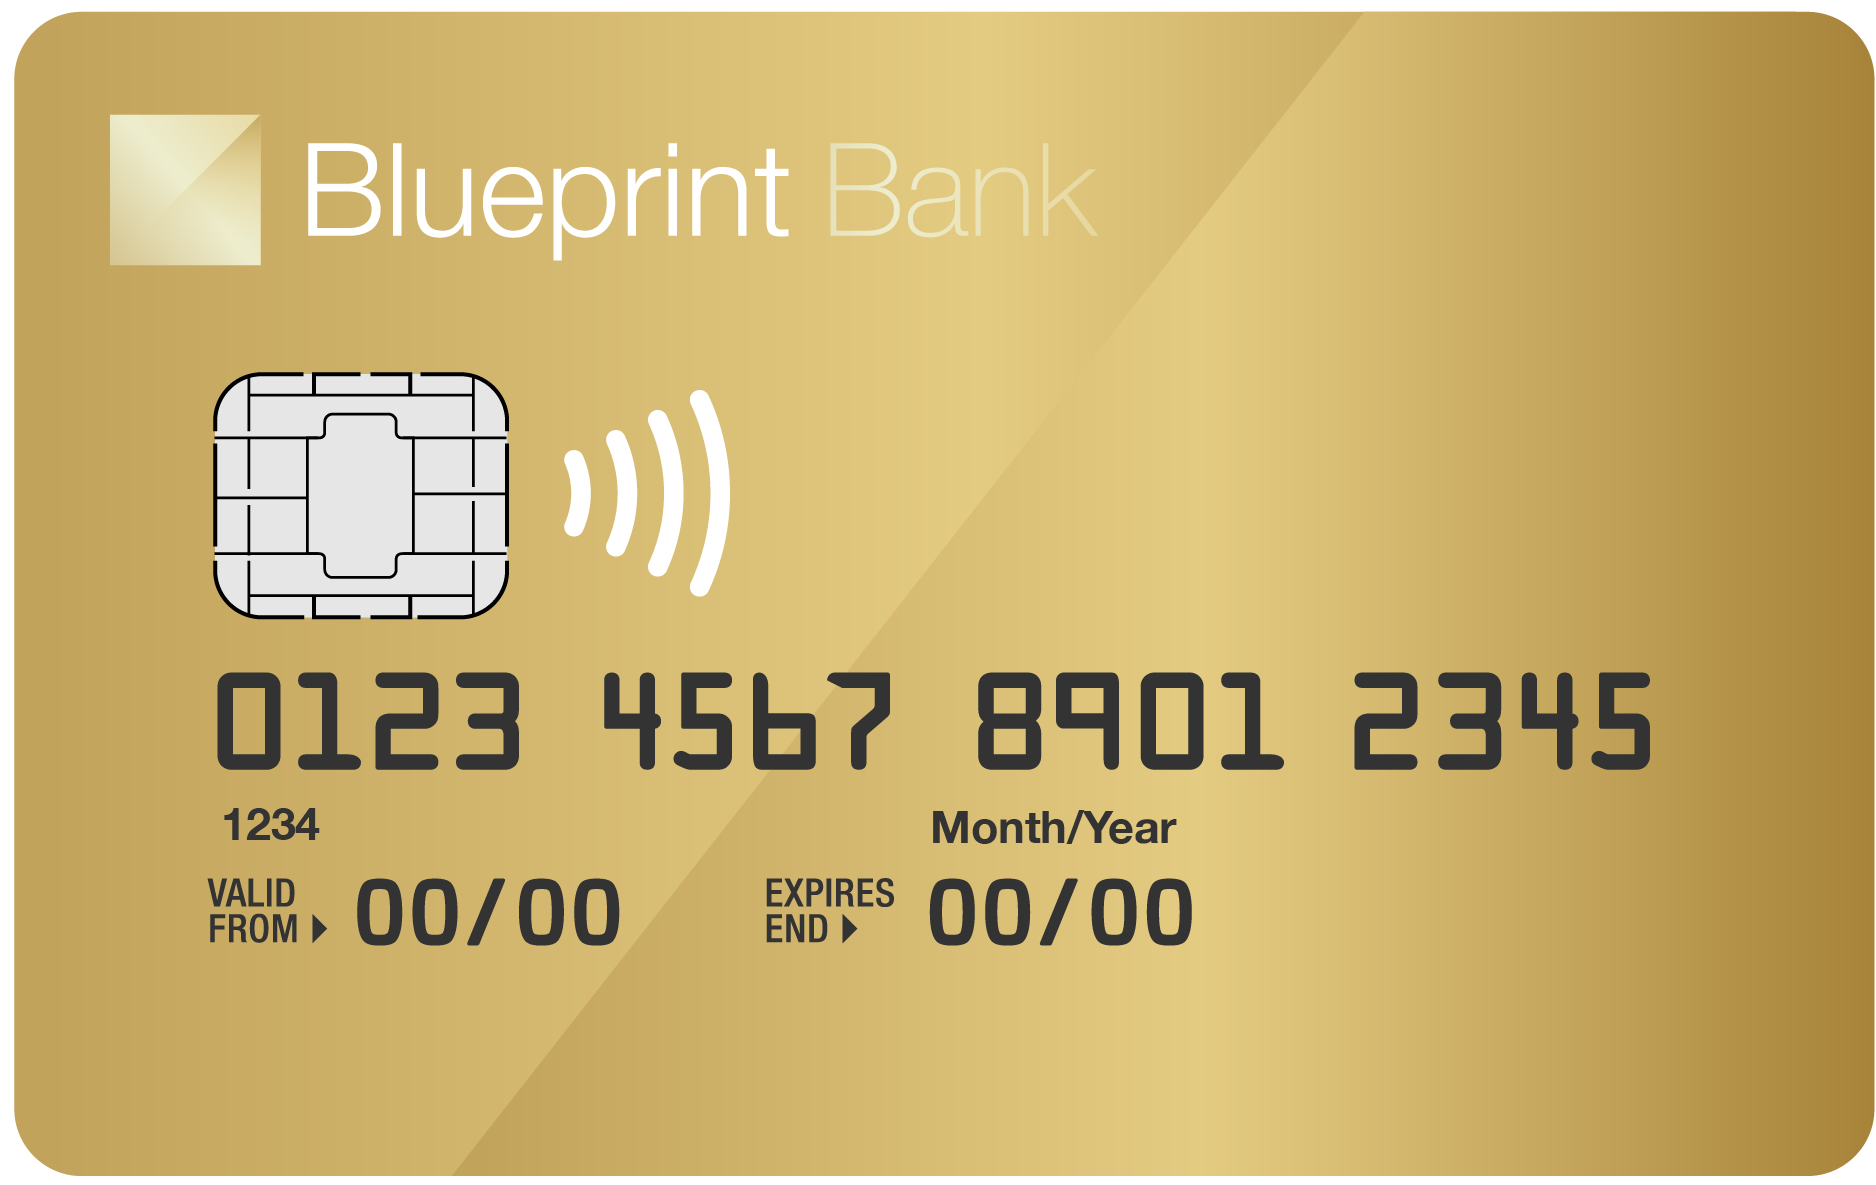 BB_Credit Card_Gold.png